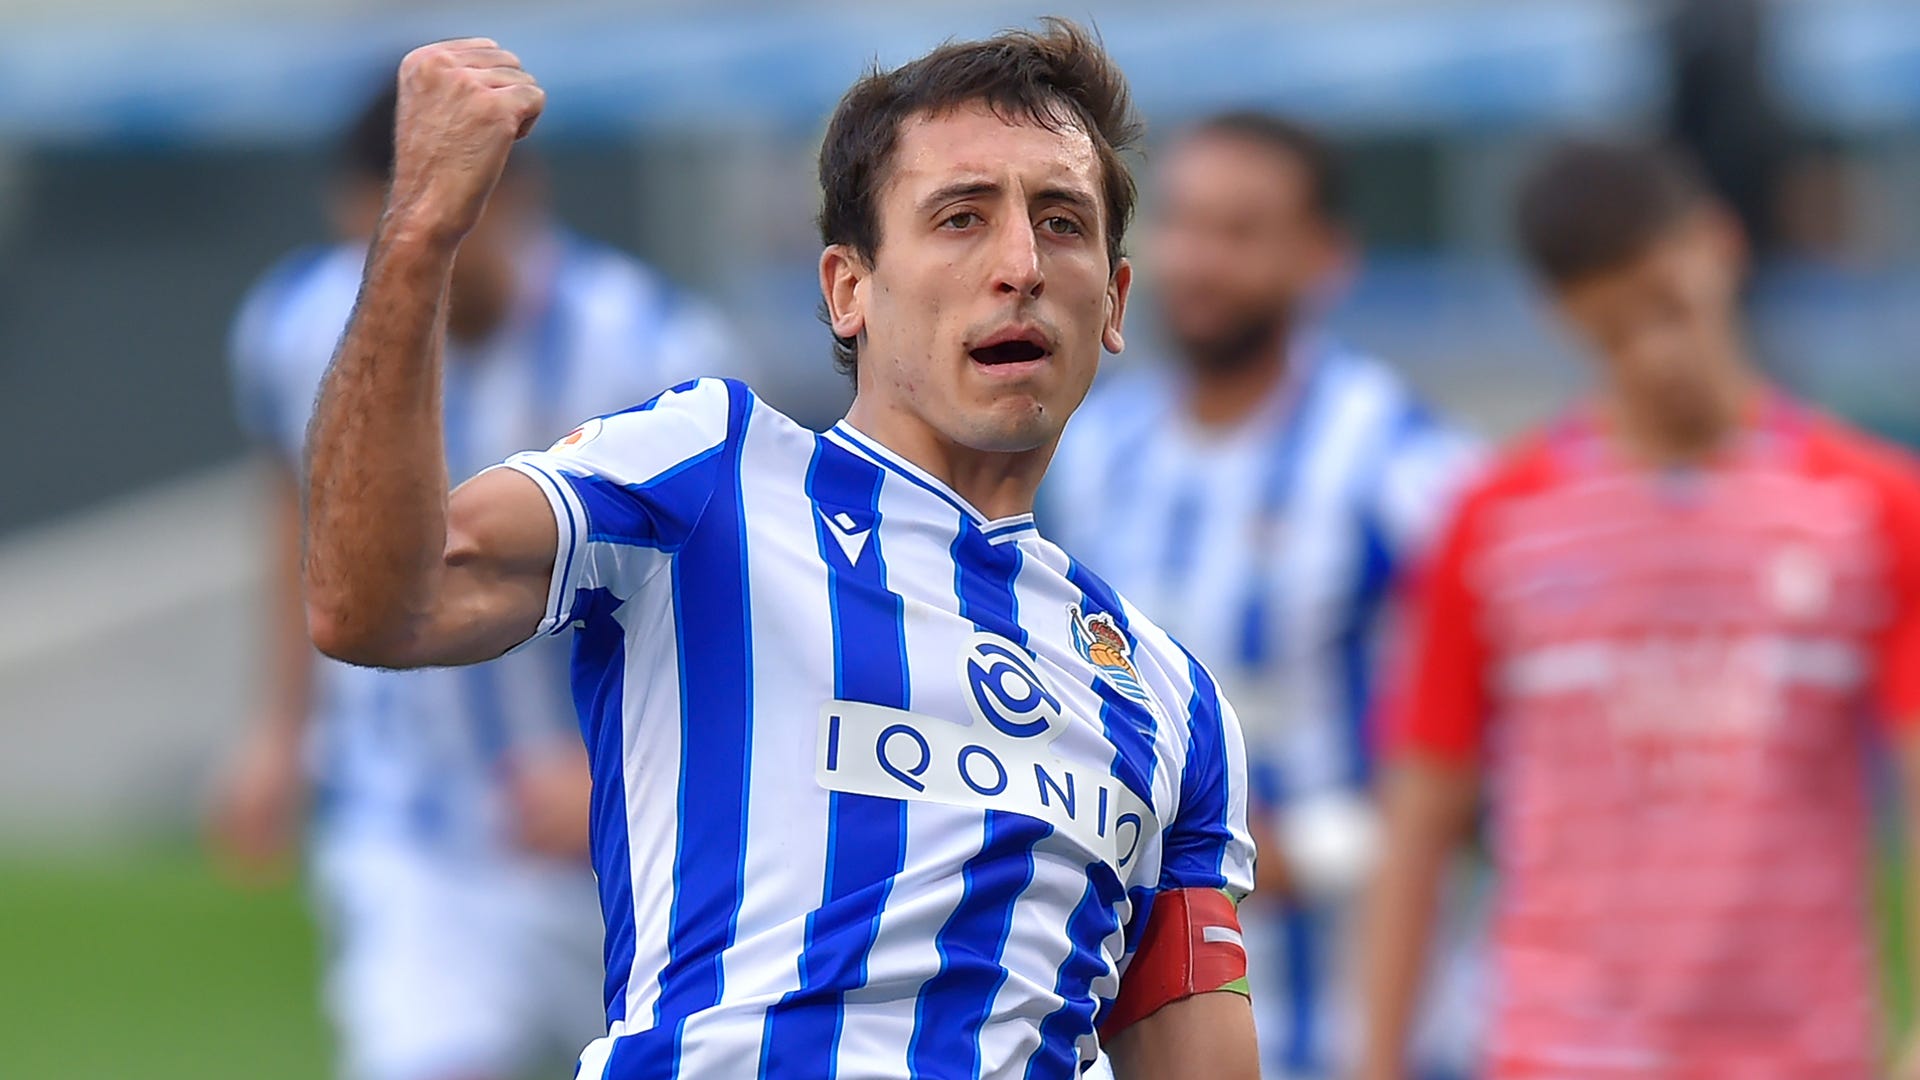 Big boost for Real Sociedad as Oyarzabal makes speedy recovery from injury ahead of Man Utd clash - Goal.com US